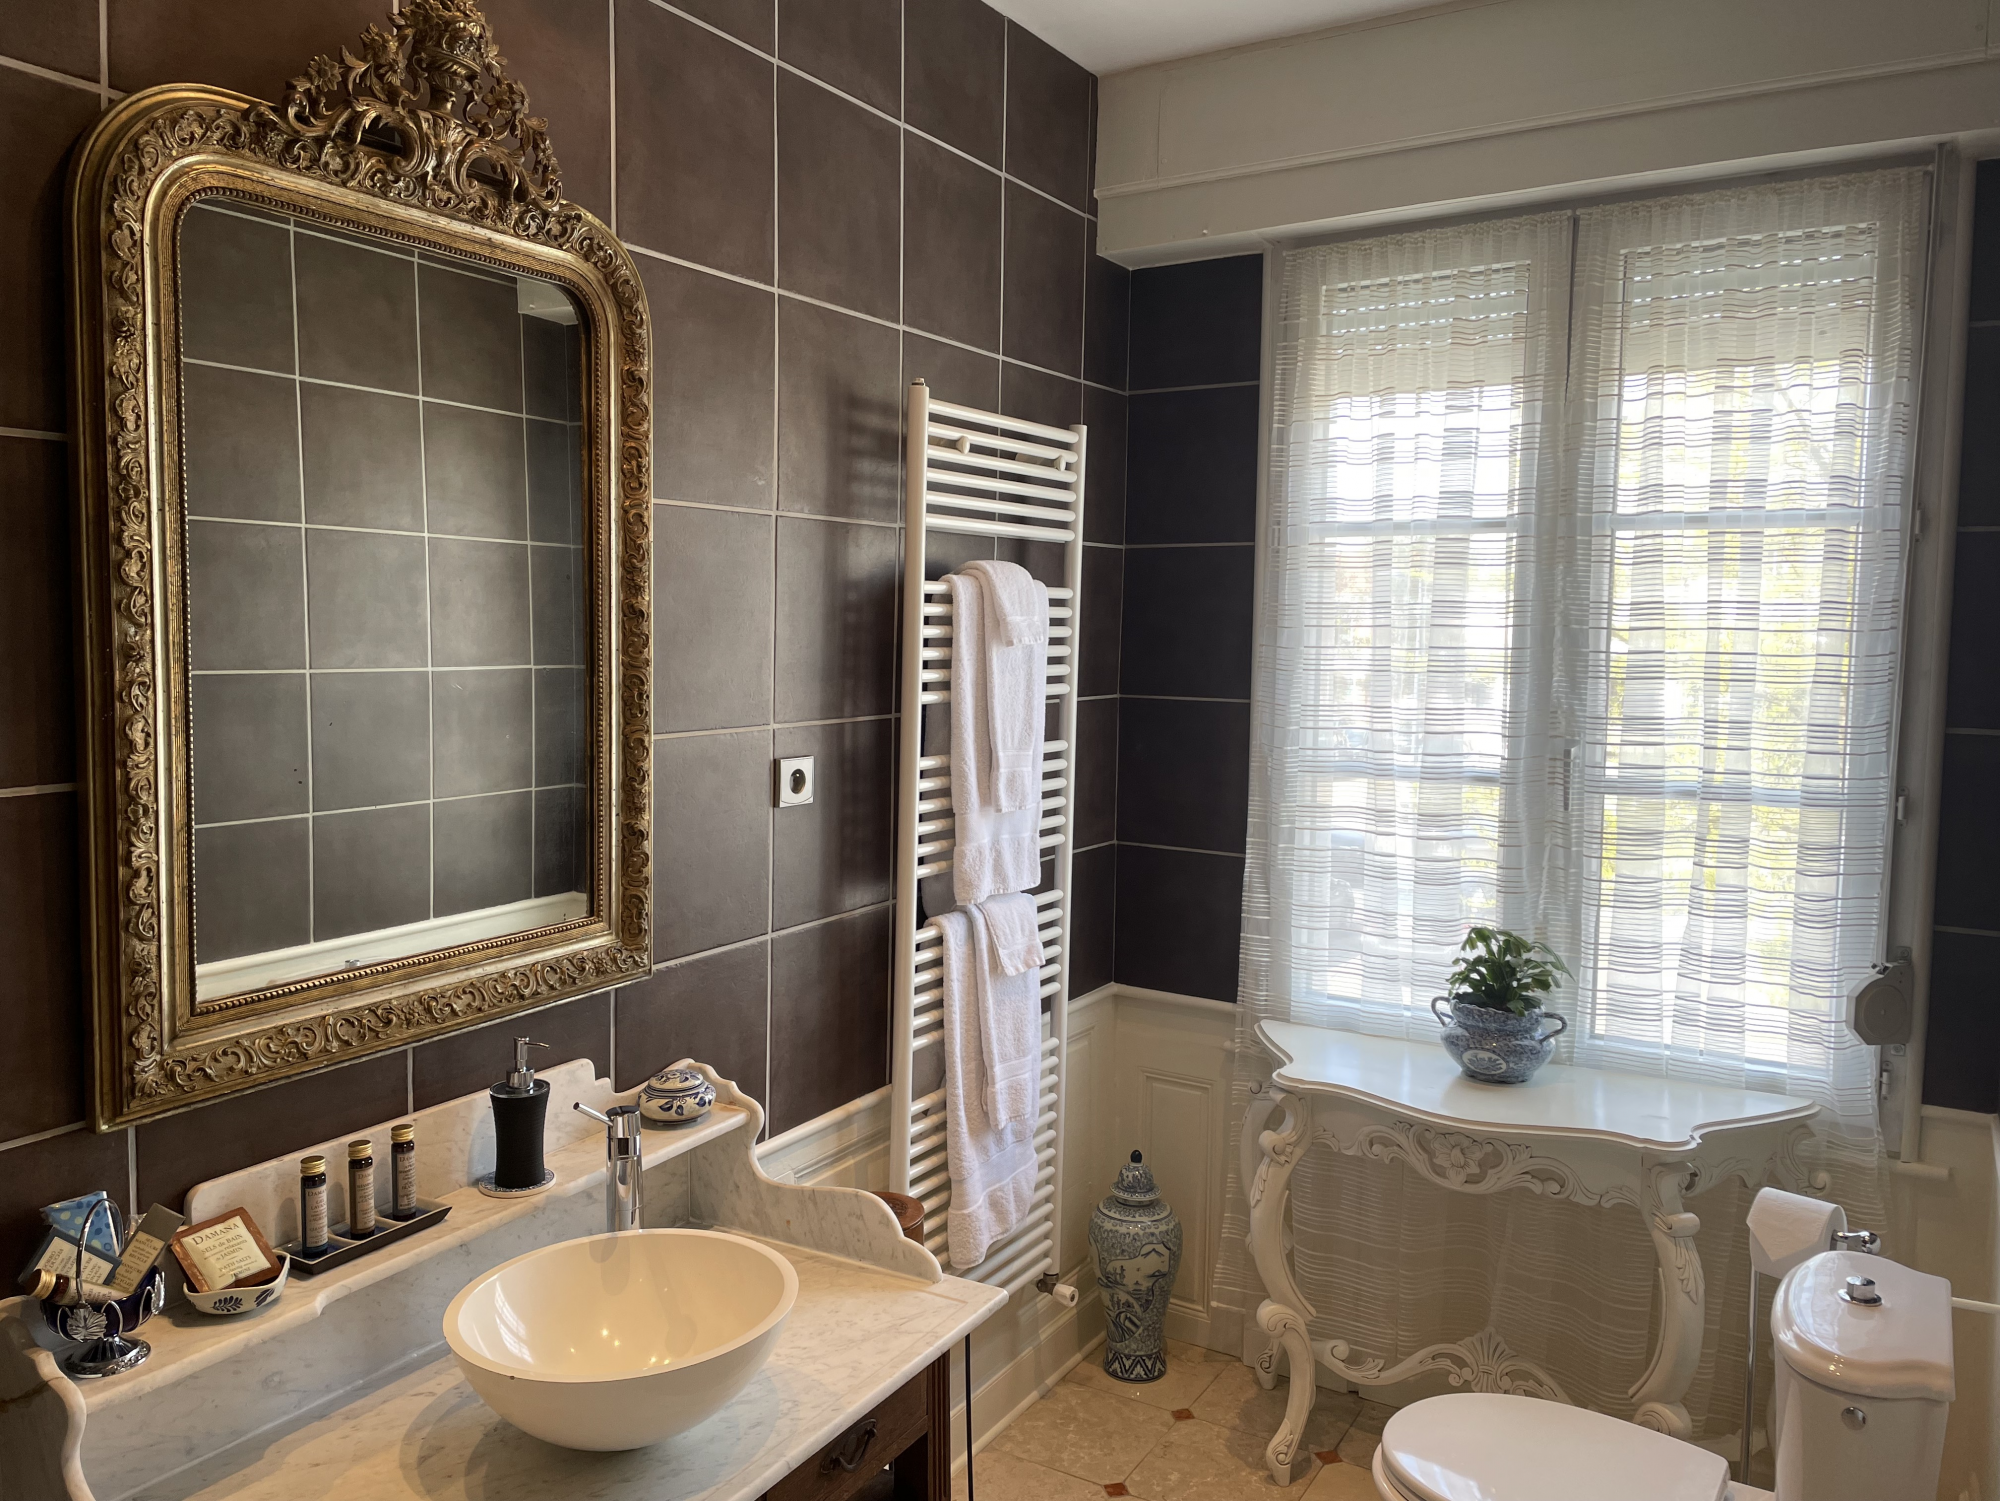 The Double Deluxe bathroom is a bright room filled with natural light  overlooking the main square of Corbie.